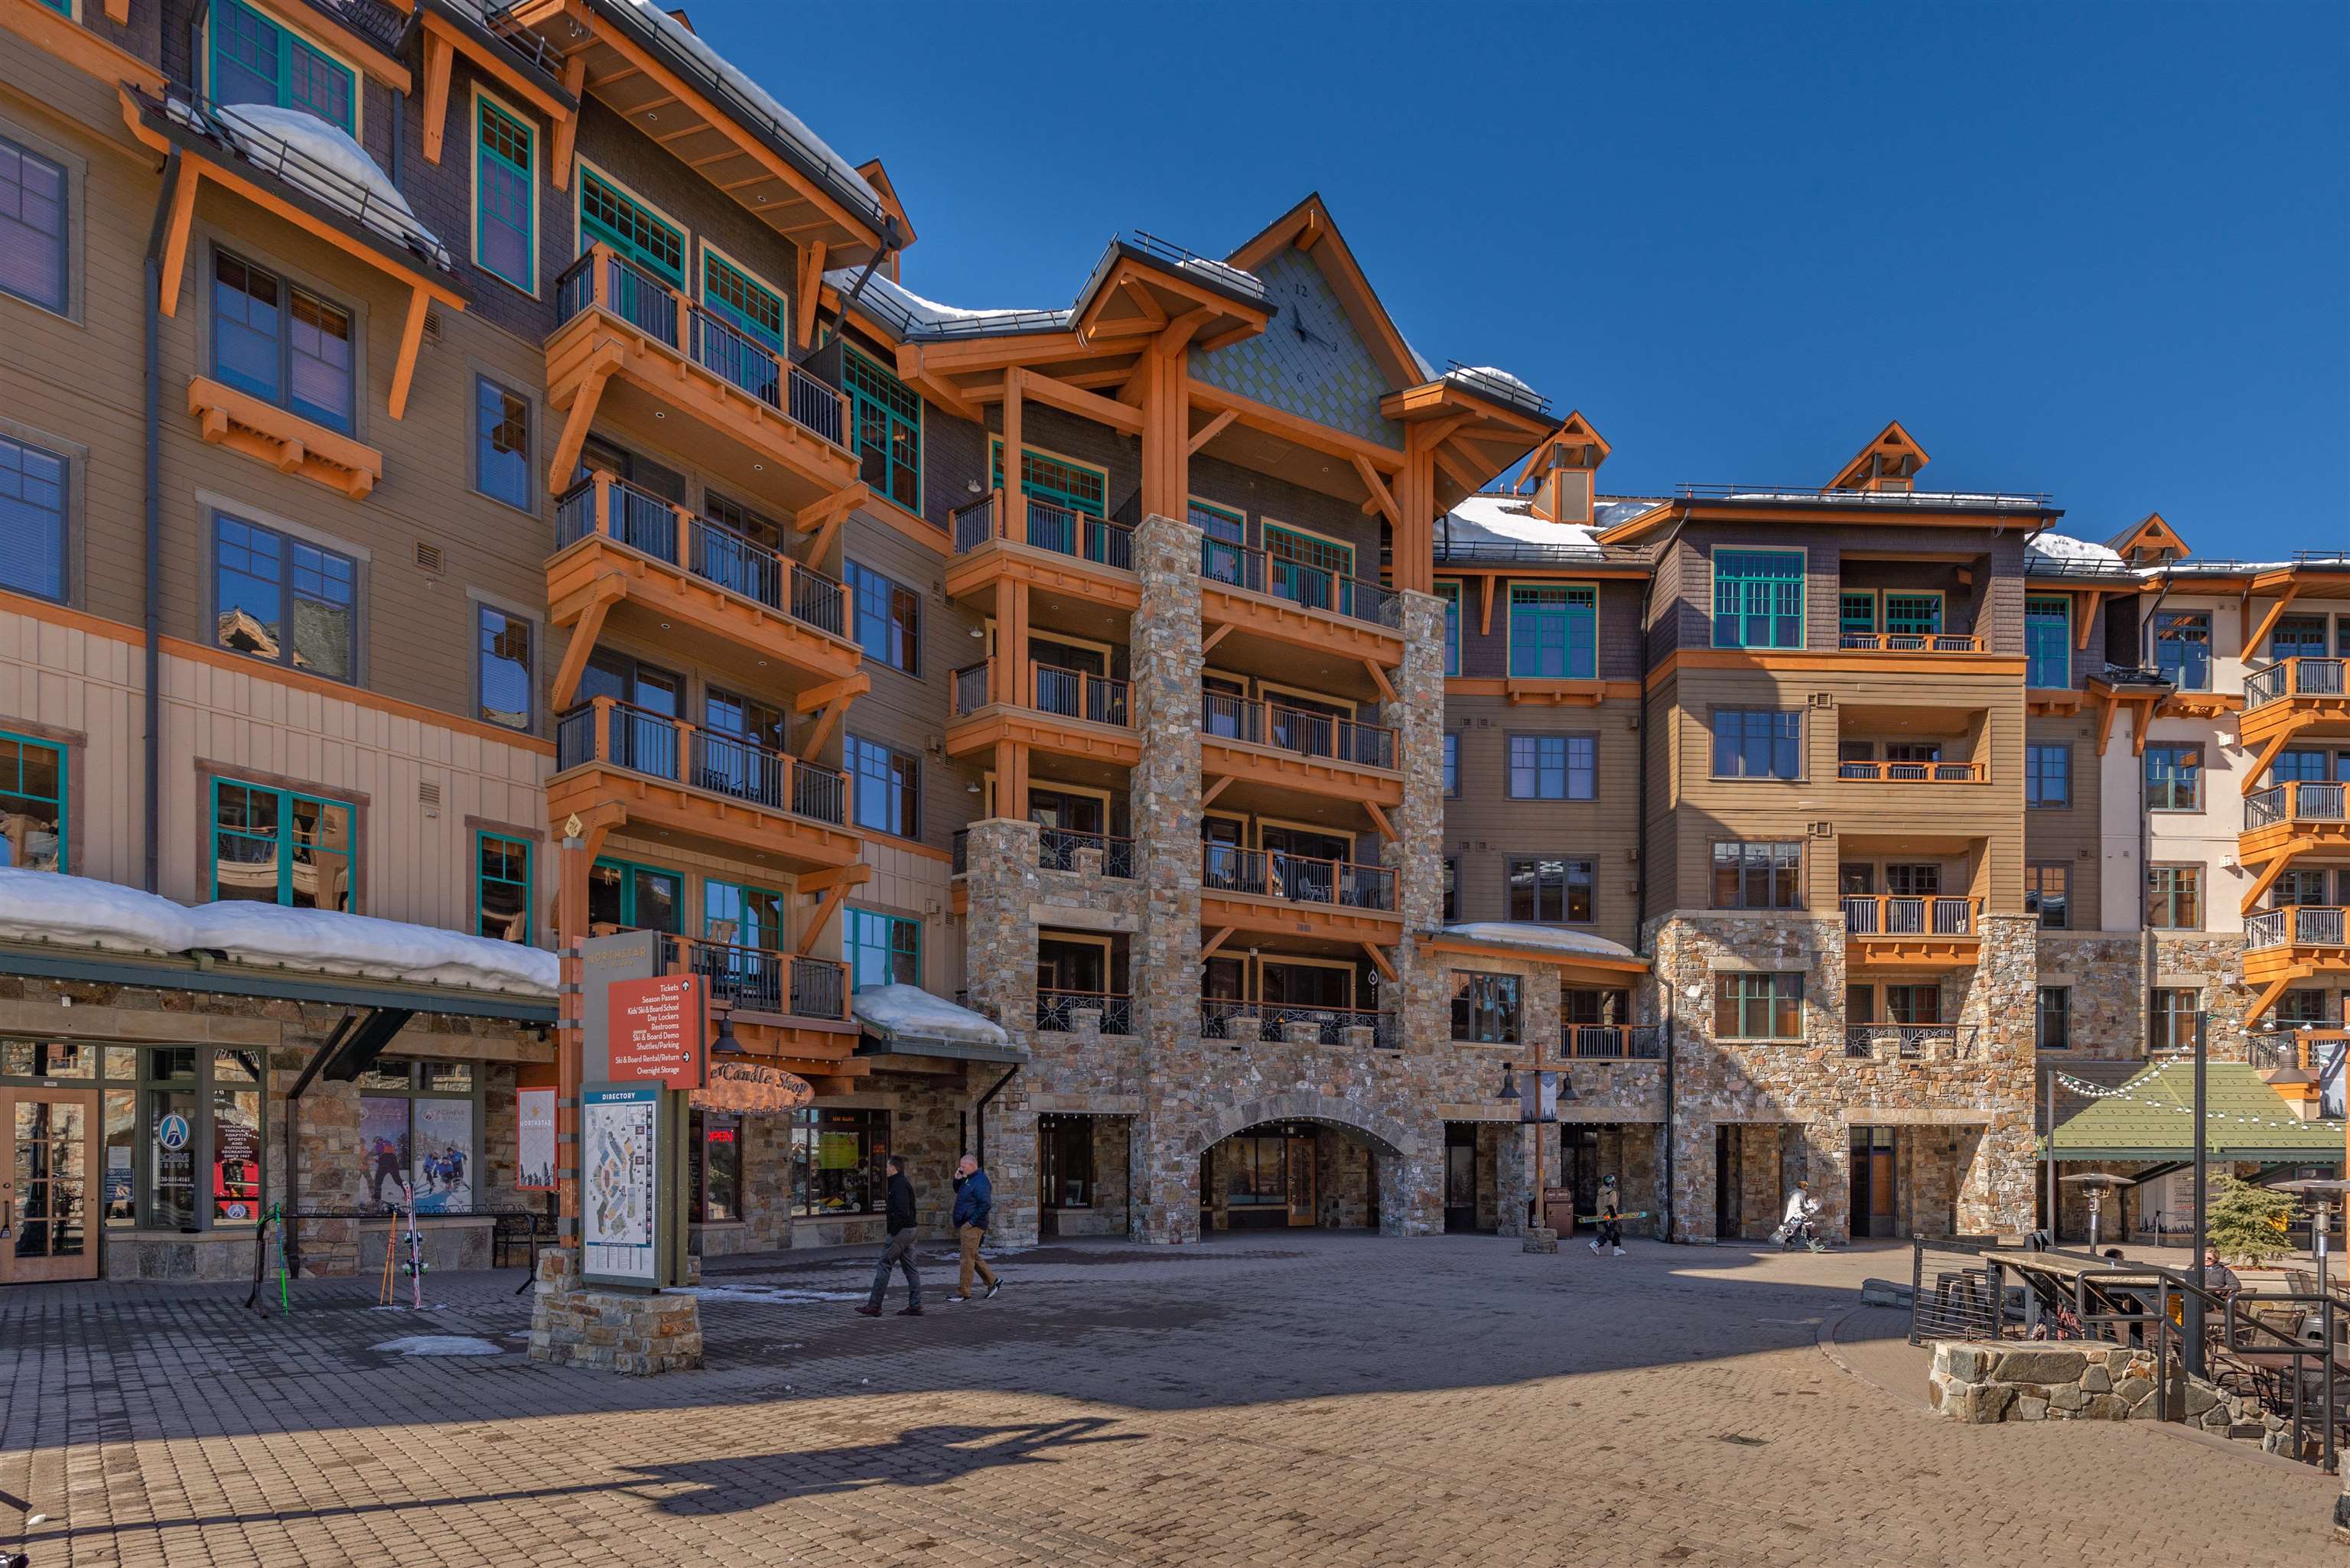 Image for 7001 Northstar Drive, Truckee, CA 96161